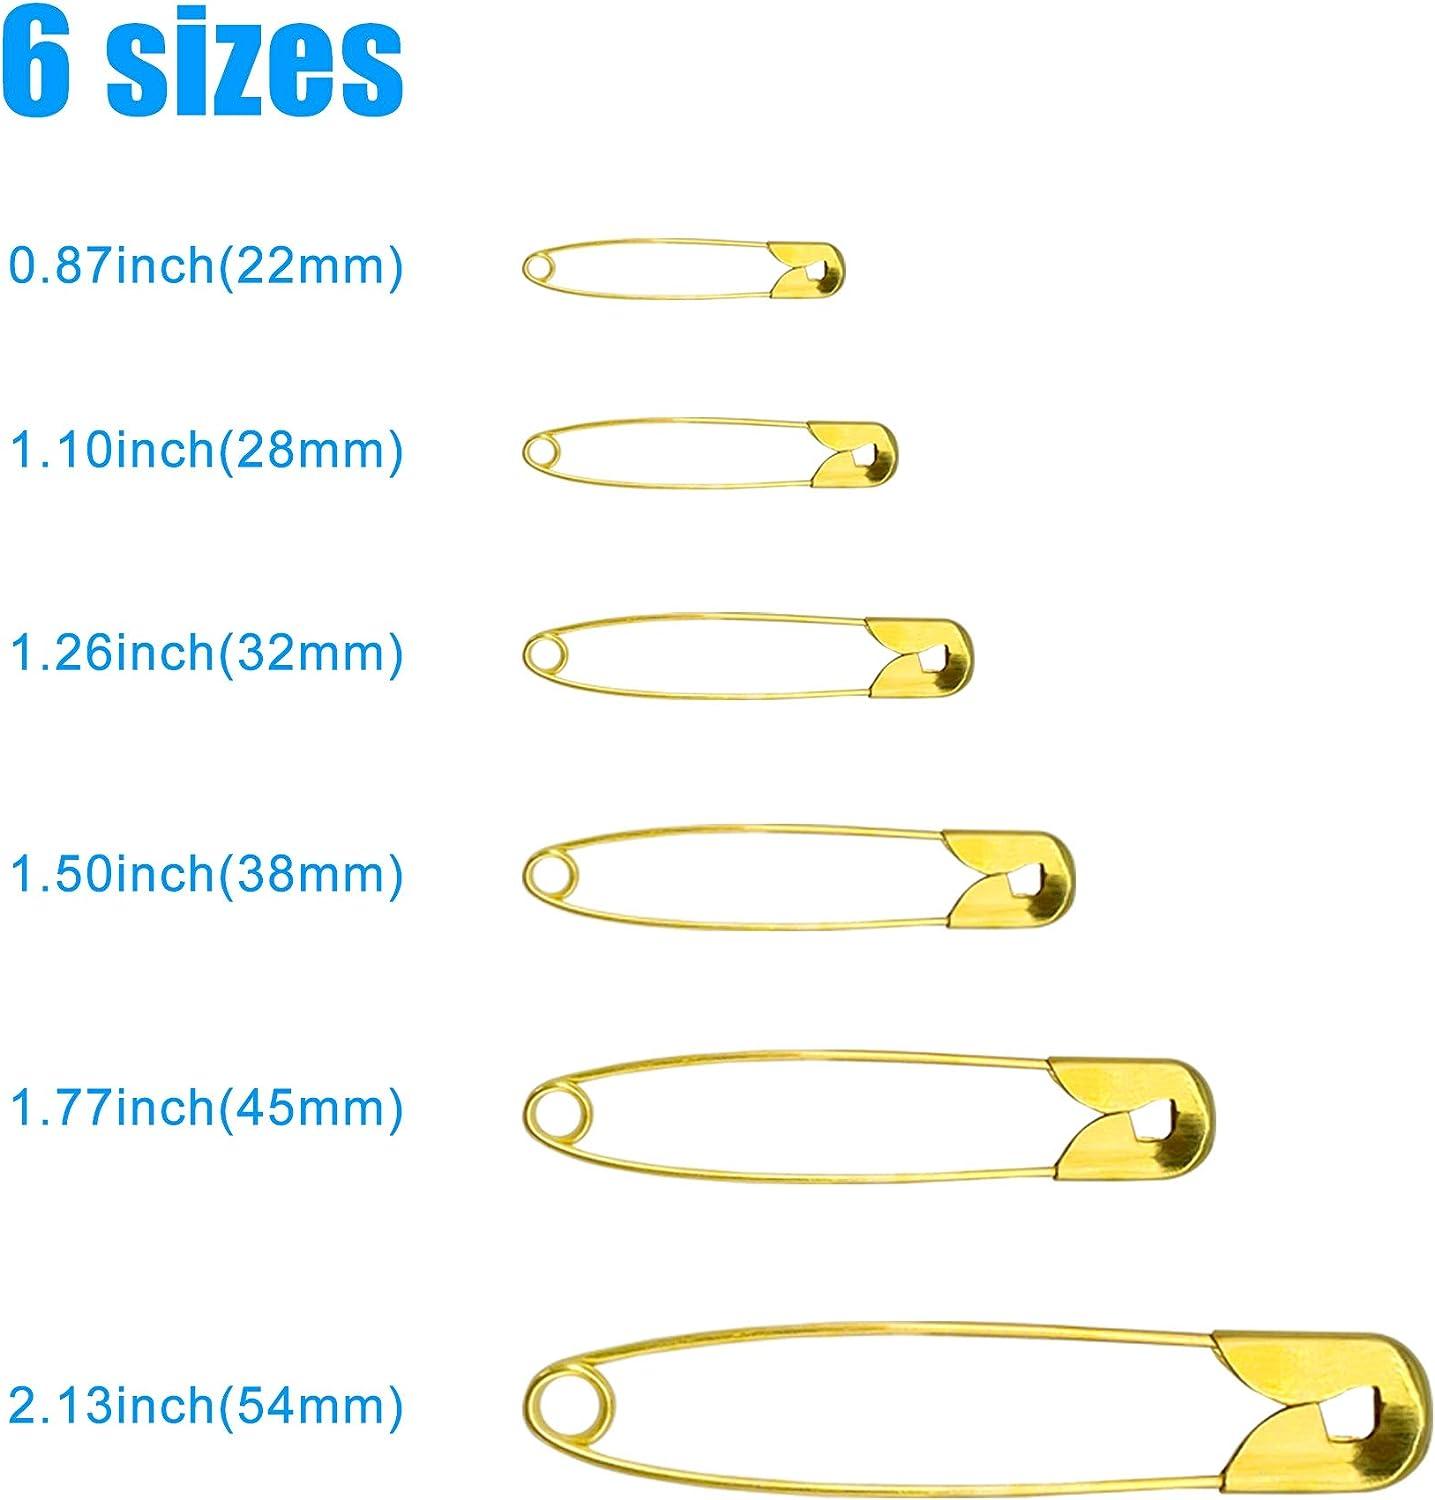 250 Pieces 6 Sizes Safety Pins Large And Small Safety Pins Durable,  Rust-resistant For Art Craft Sewing Jewelry Making Home Office Use (gold)